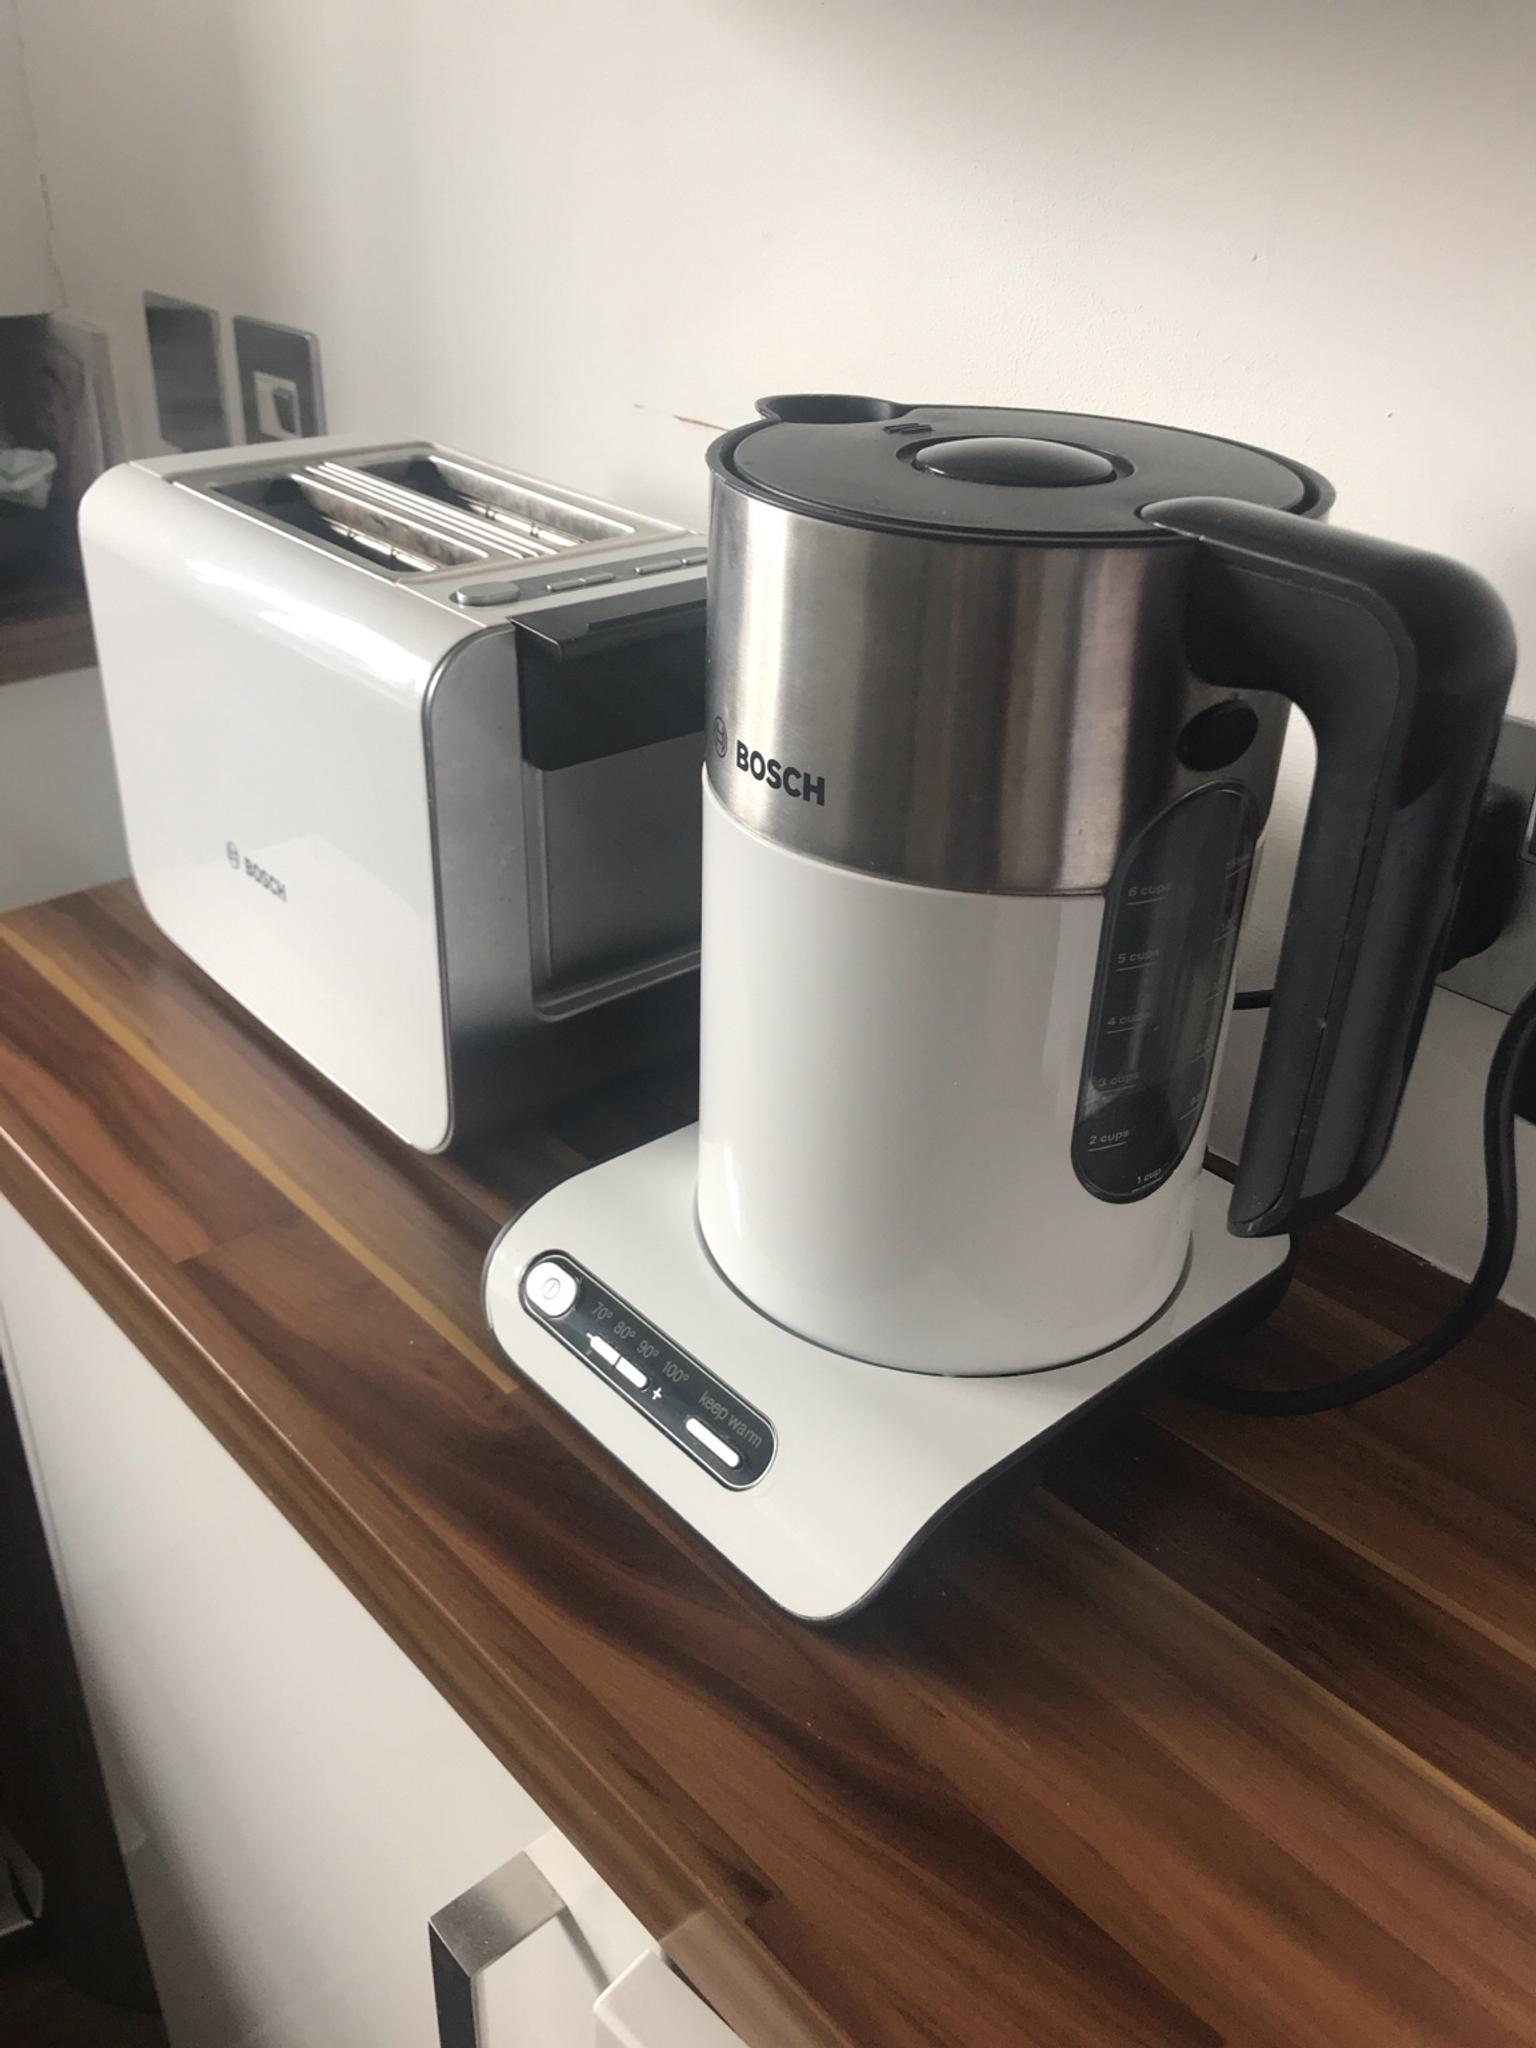 Bosch Kettle And Toaster Set In Kt17 London Borough Of Sutton Fur